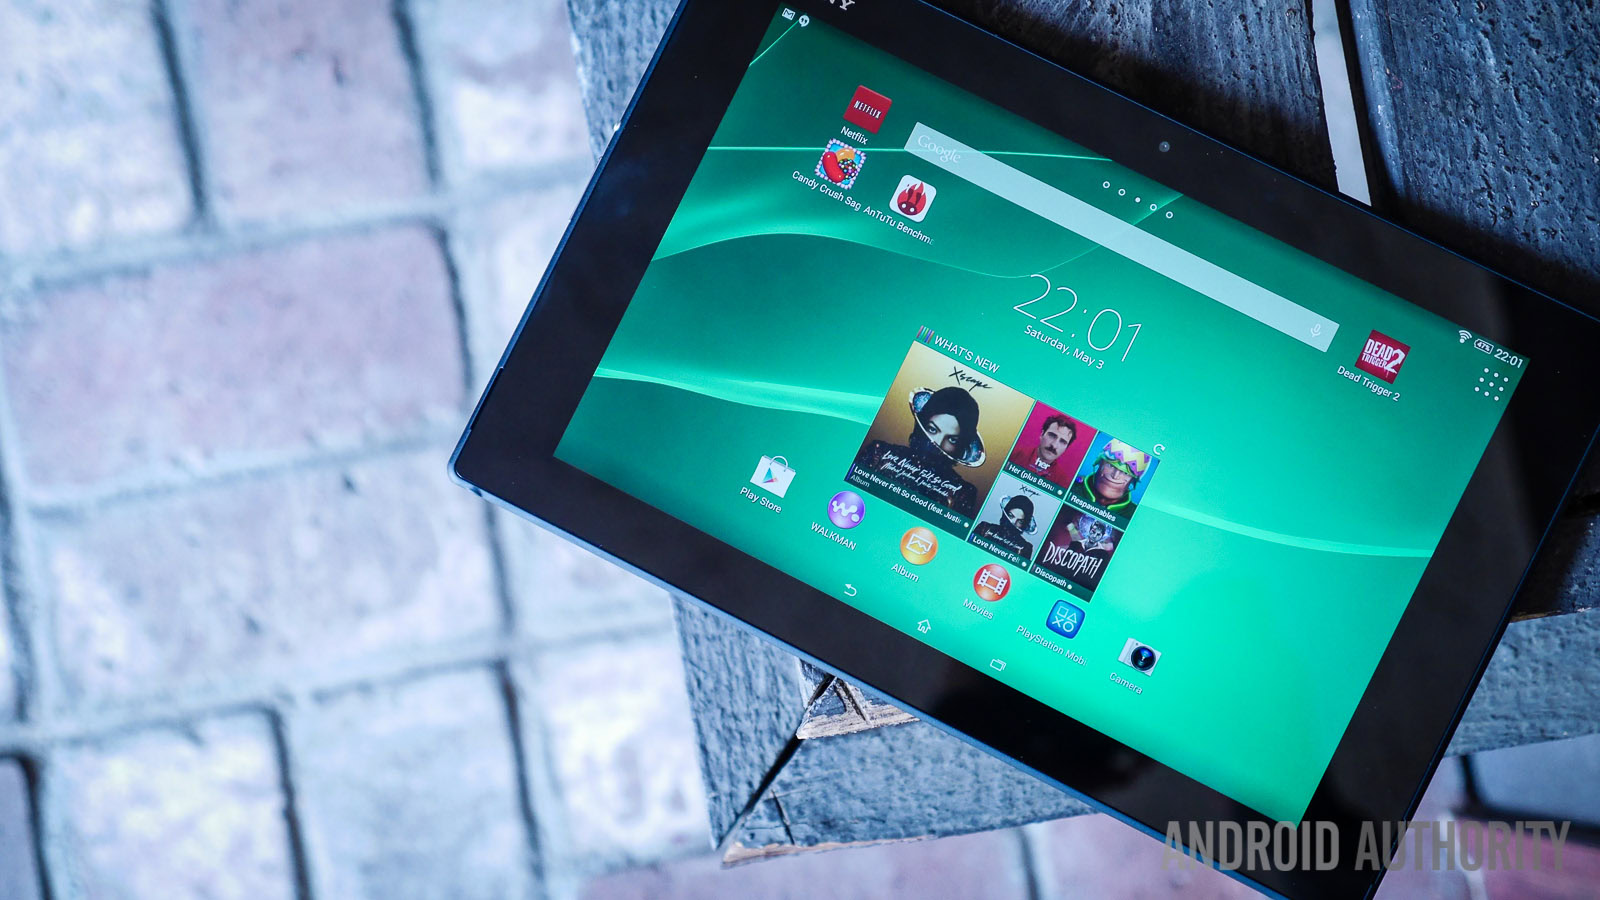 6 problems with the Sony Xperia Z2 Tablet and how to fix them